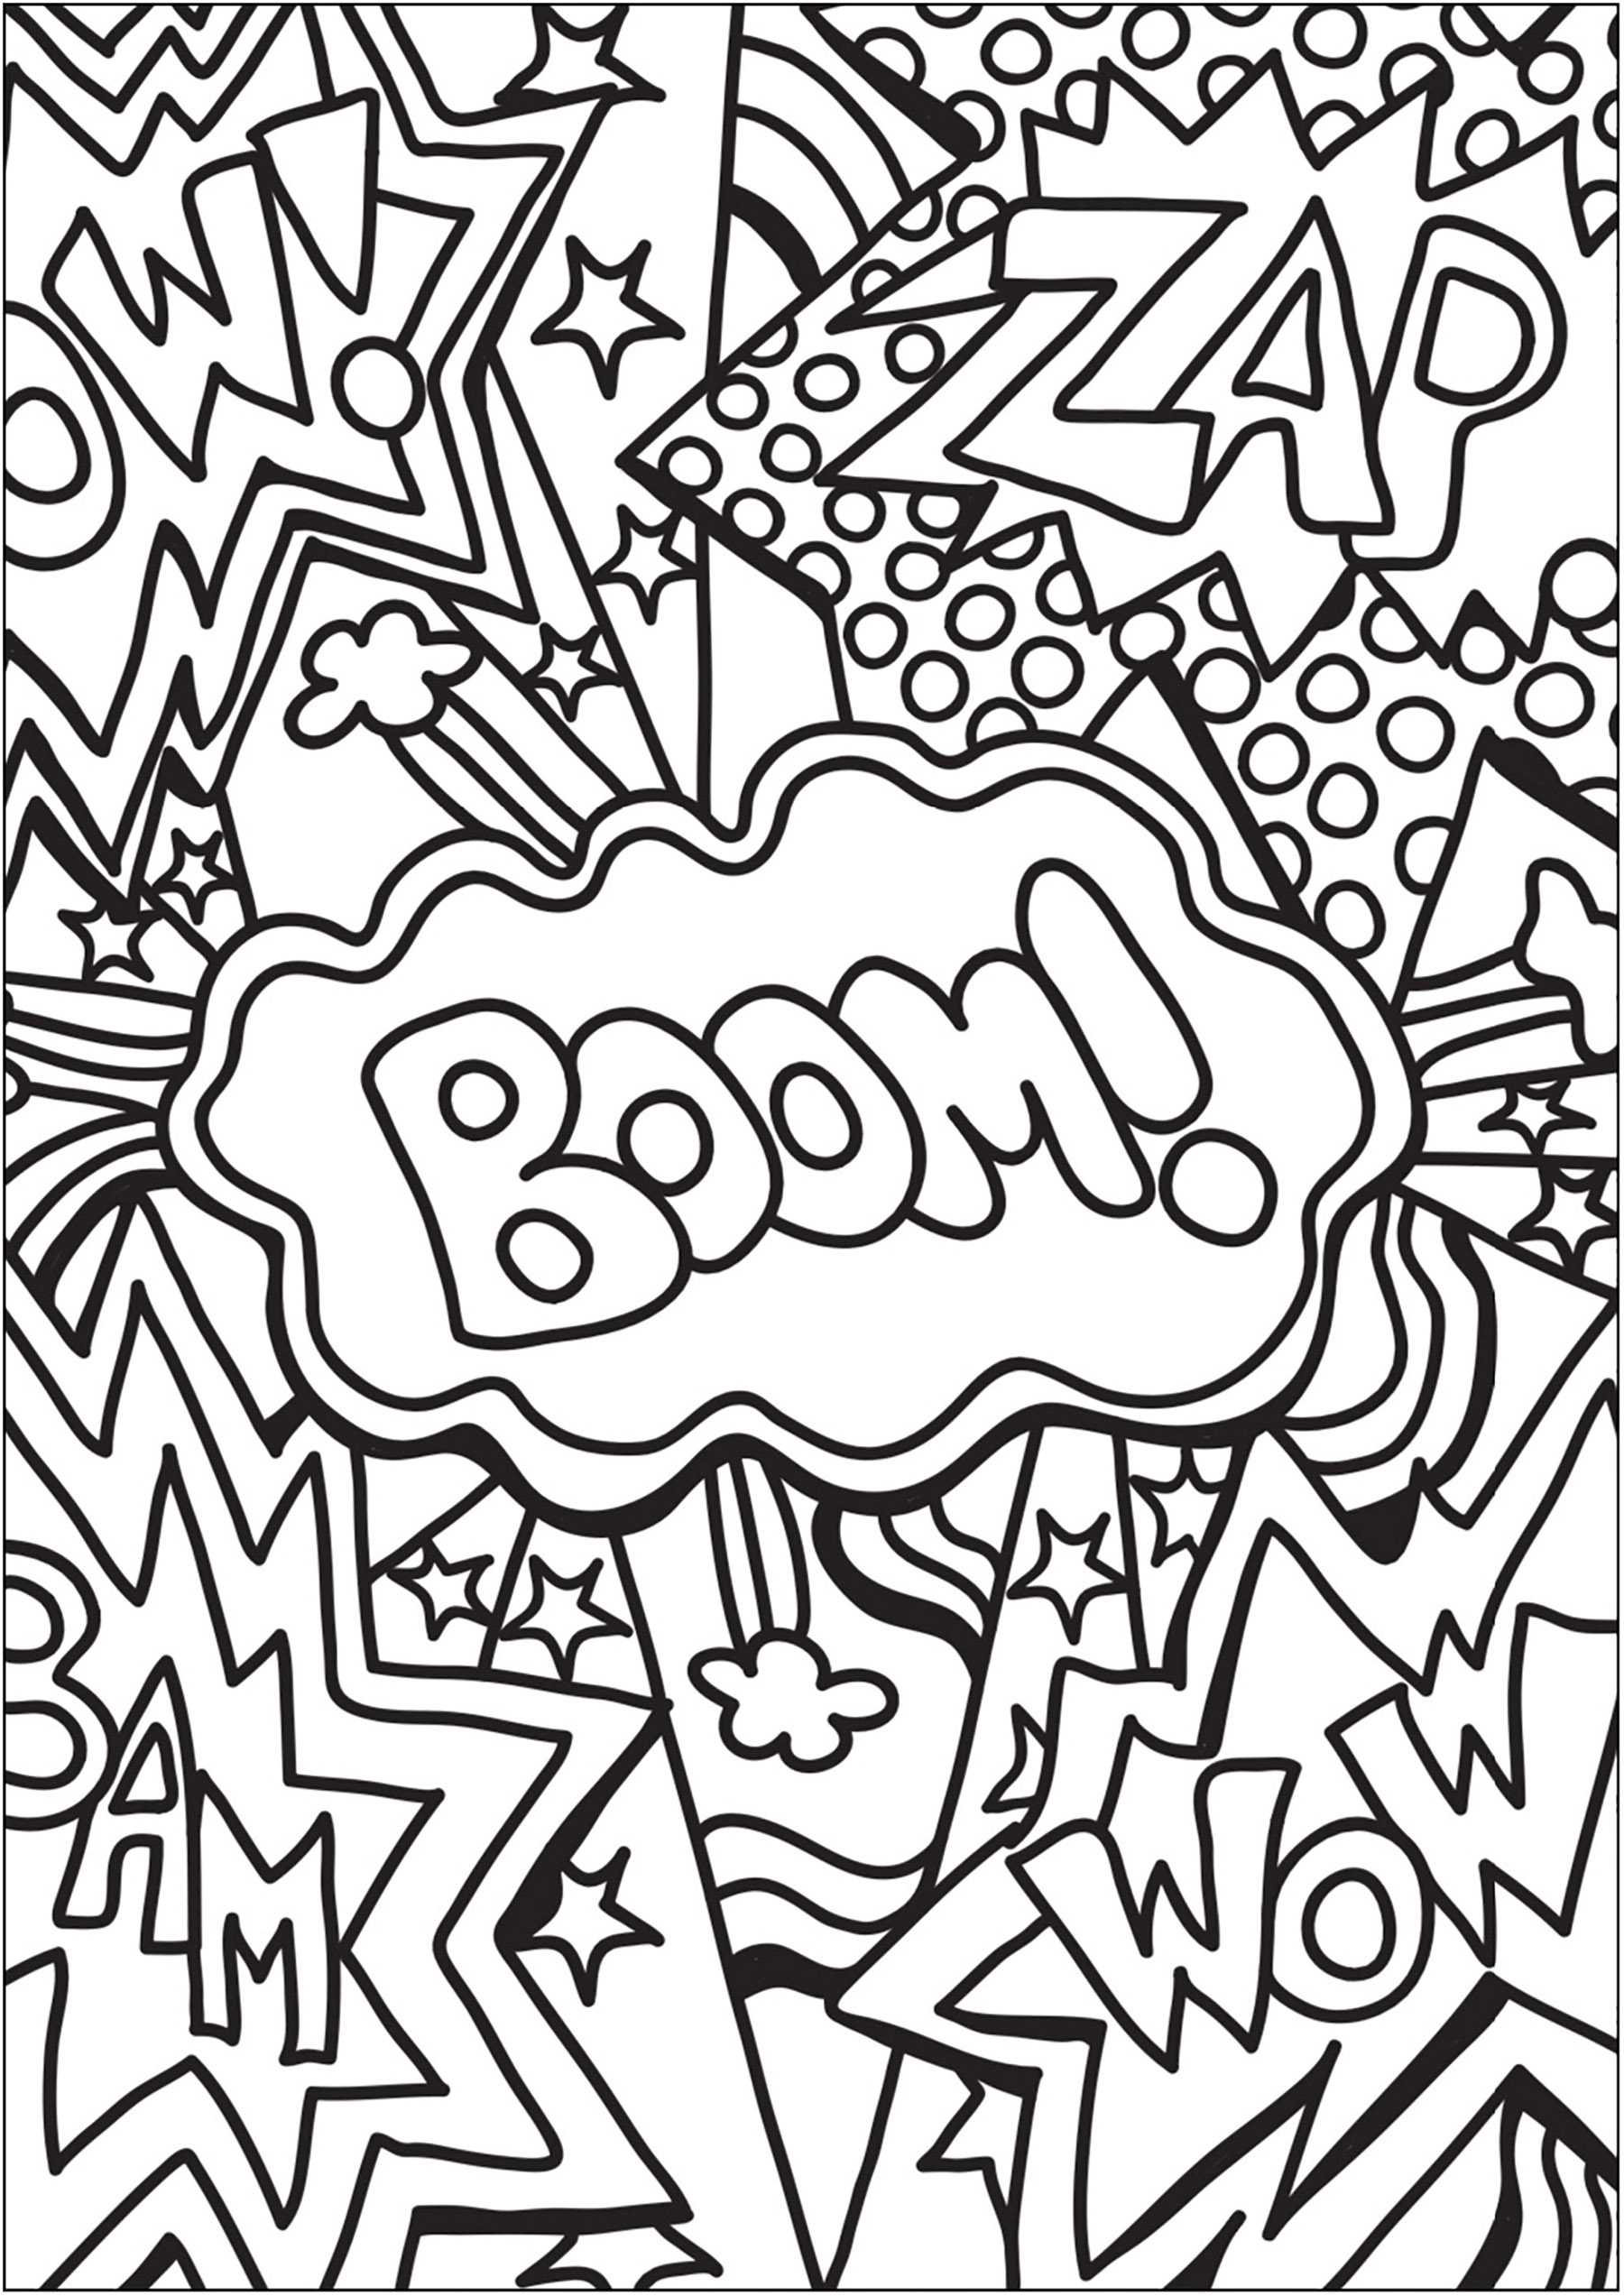 Doodle with words from Comic books. Boom, Zap, Wow, Bam ...